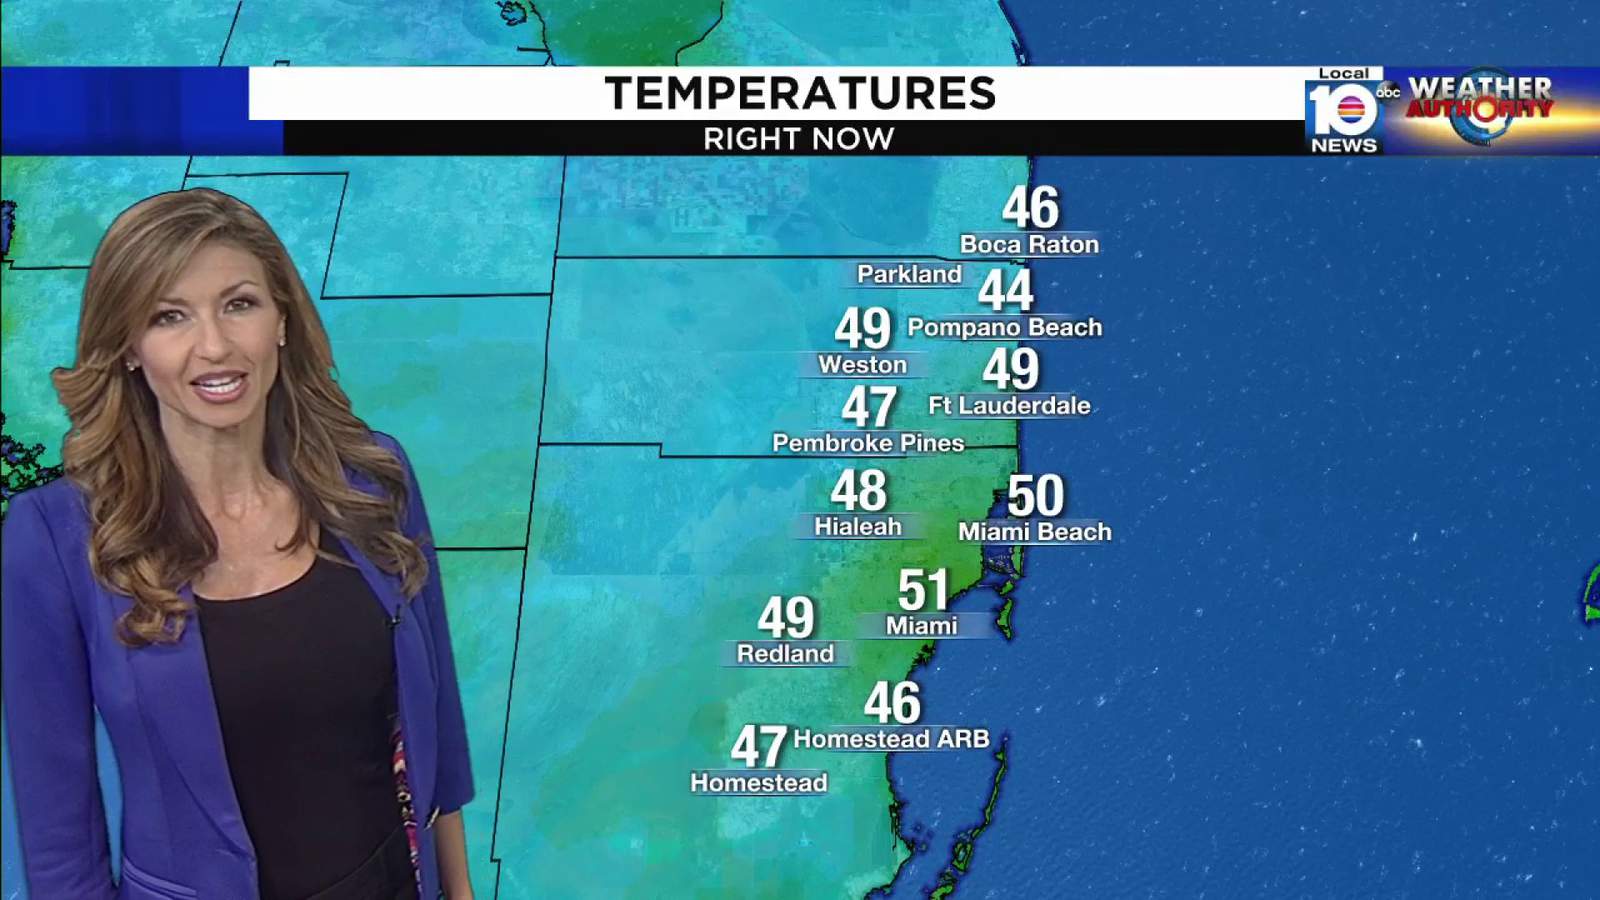 South Florida supports coldest night of the year